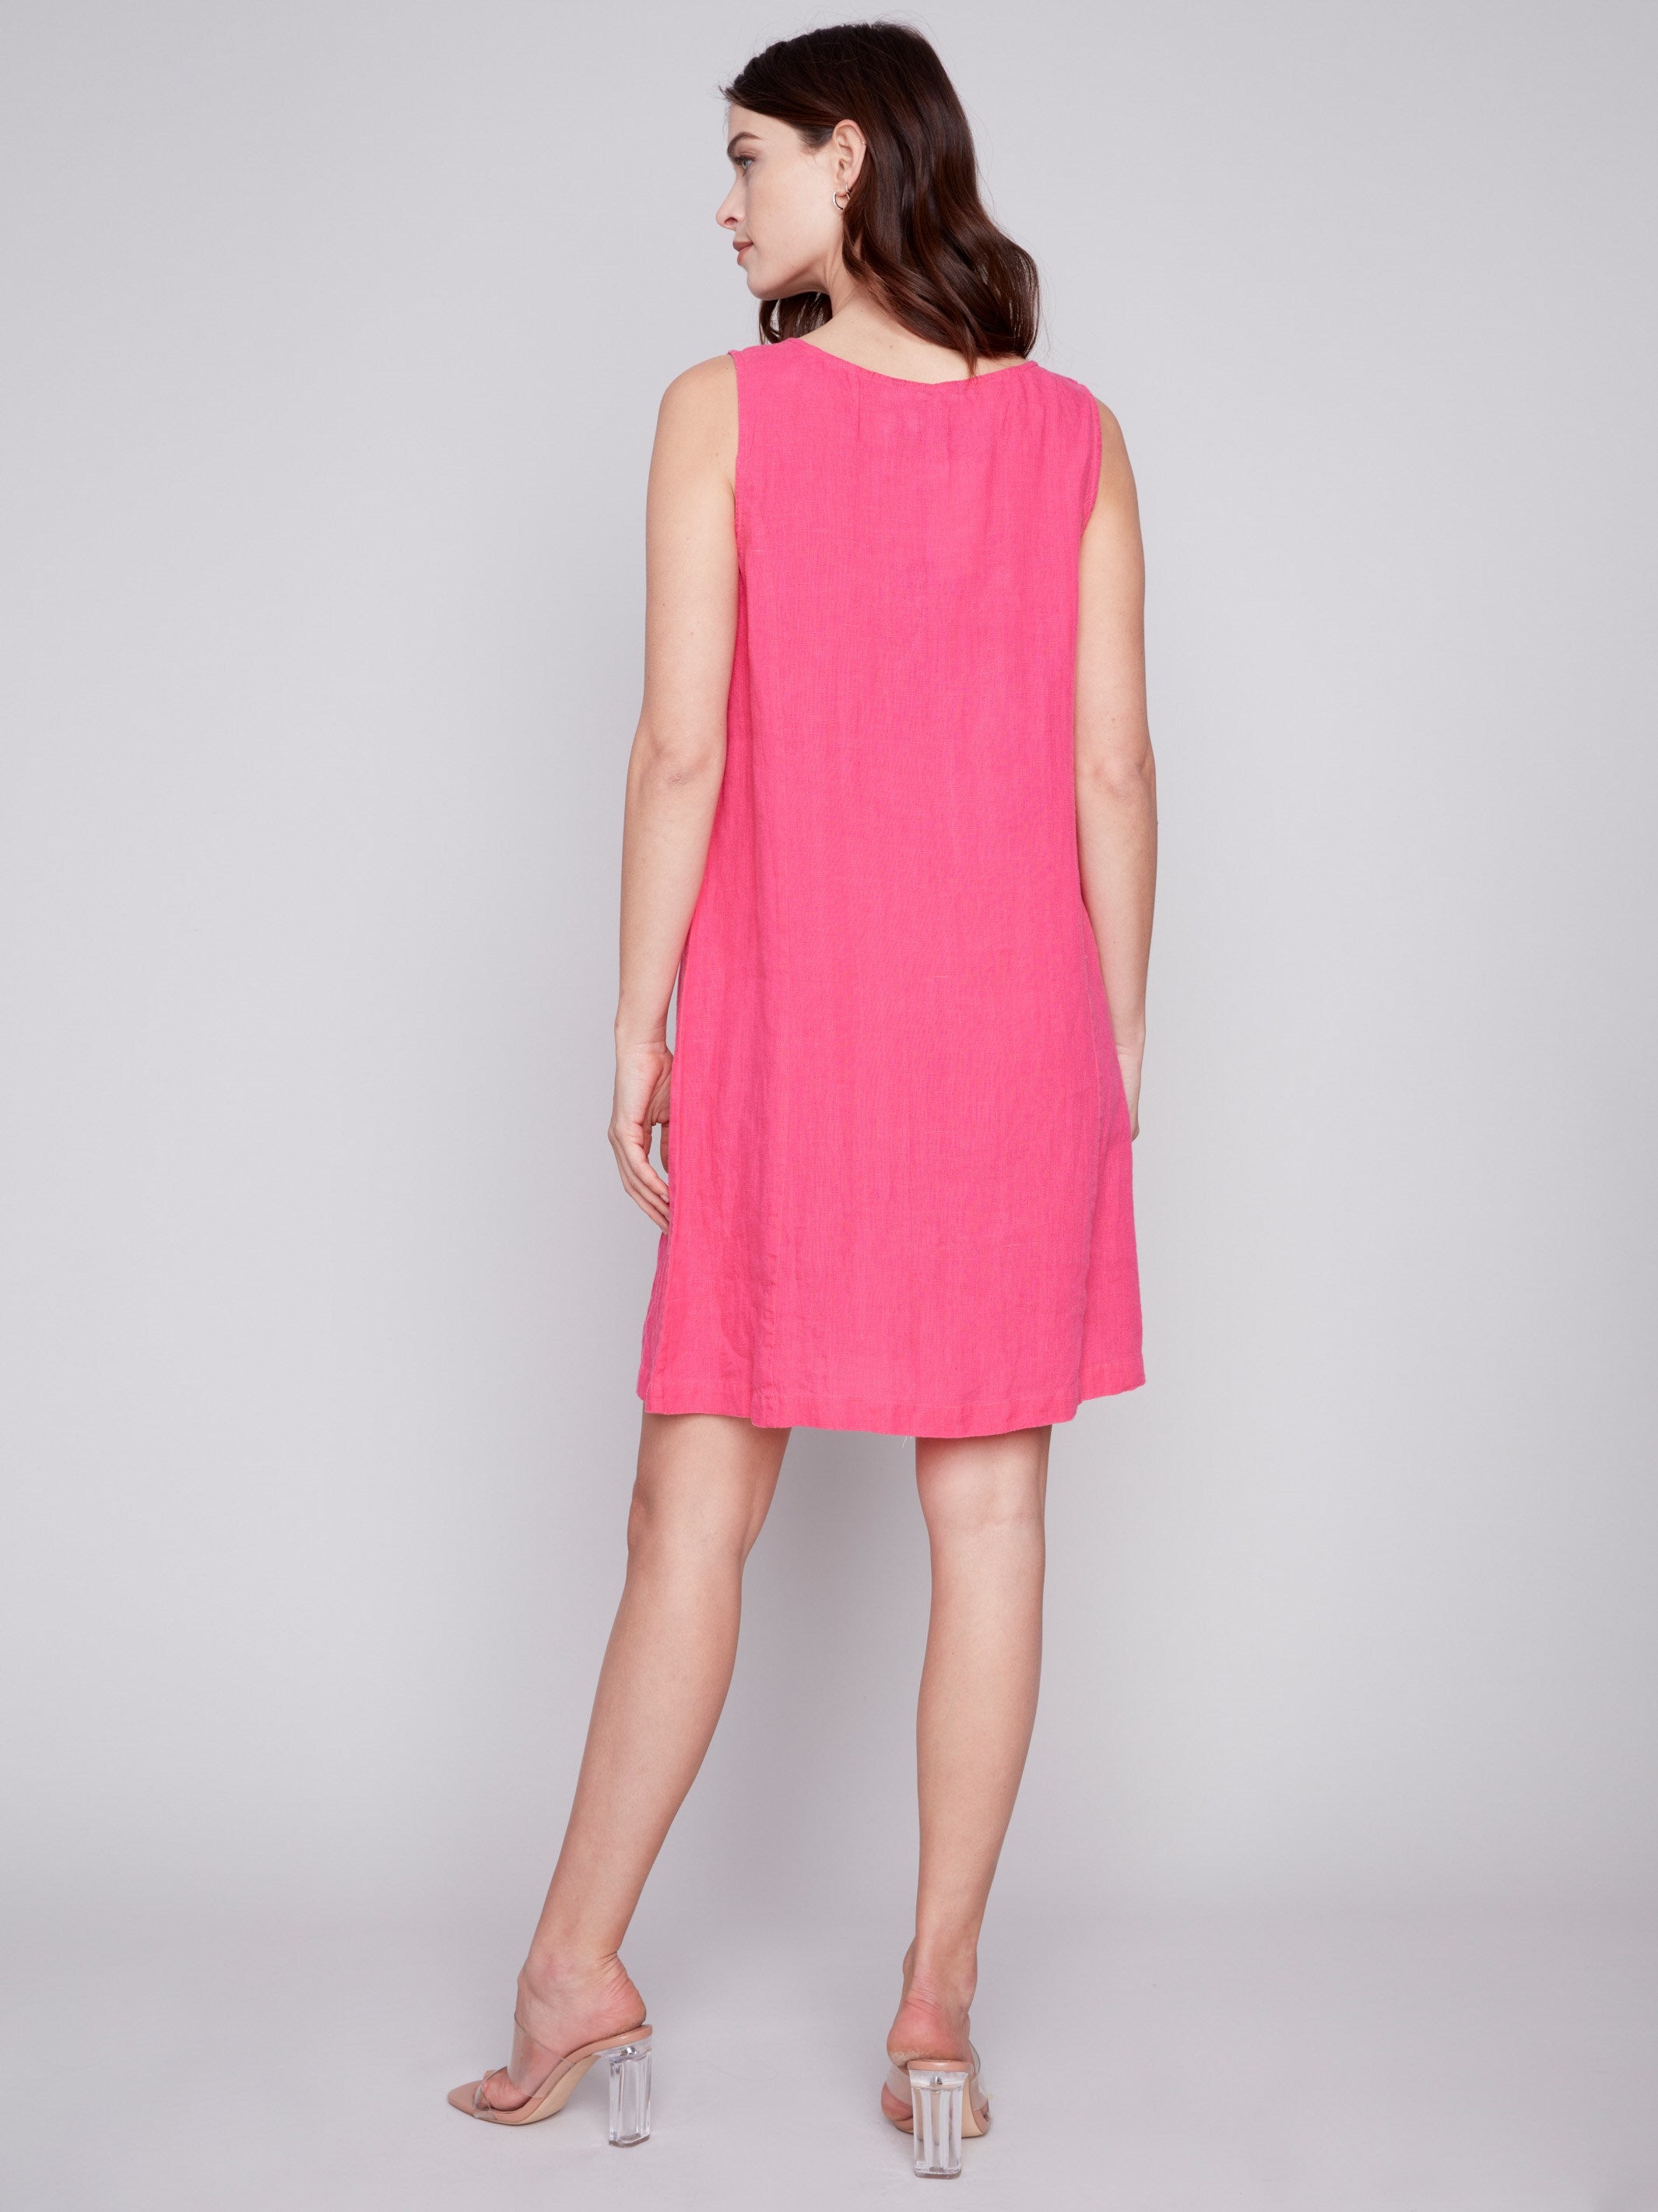 Sleeveless A-Line Linen Dress - Punch - Charlie B Collection Canada - Image 3